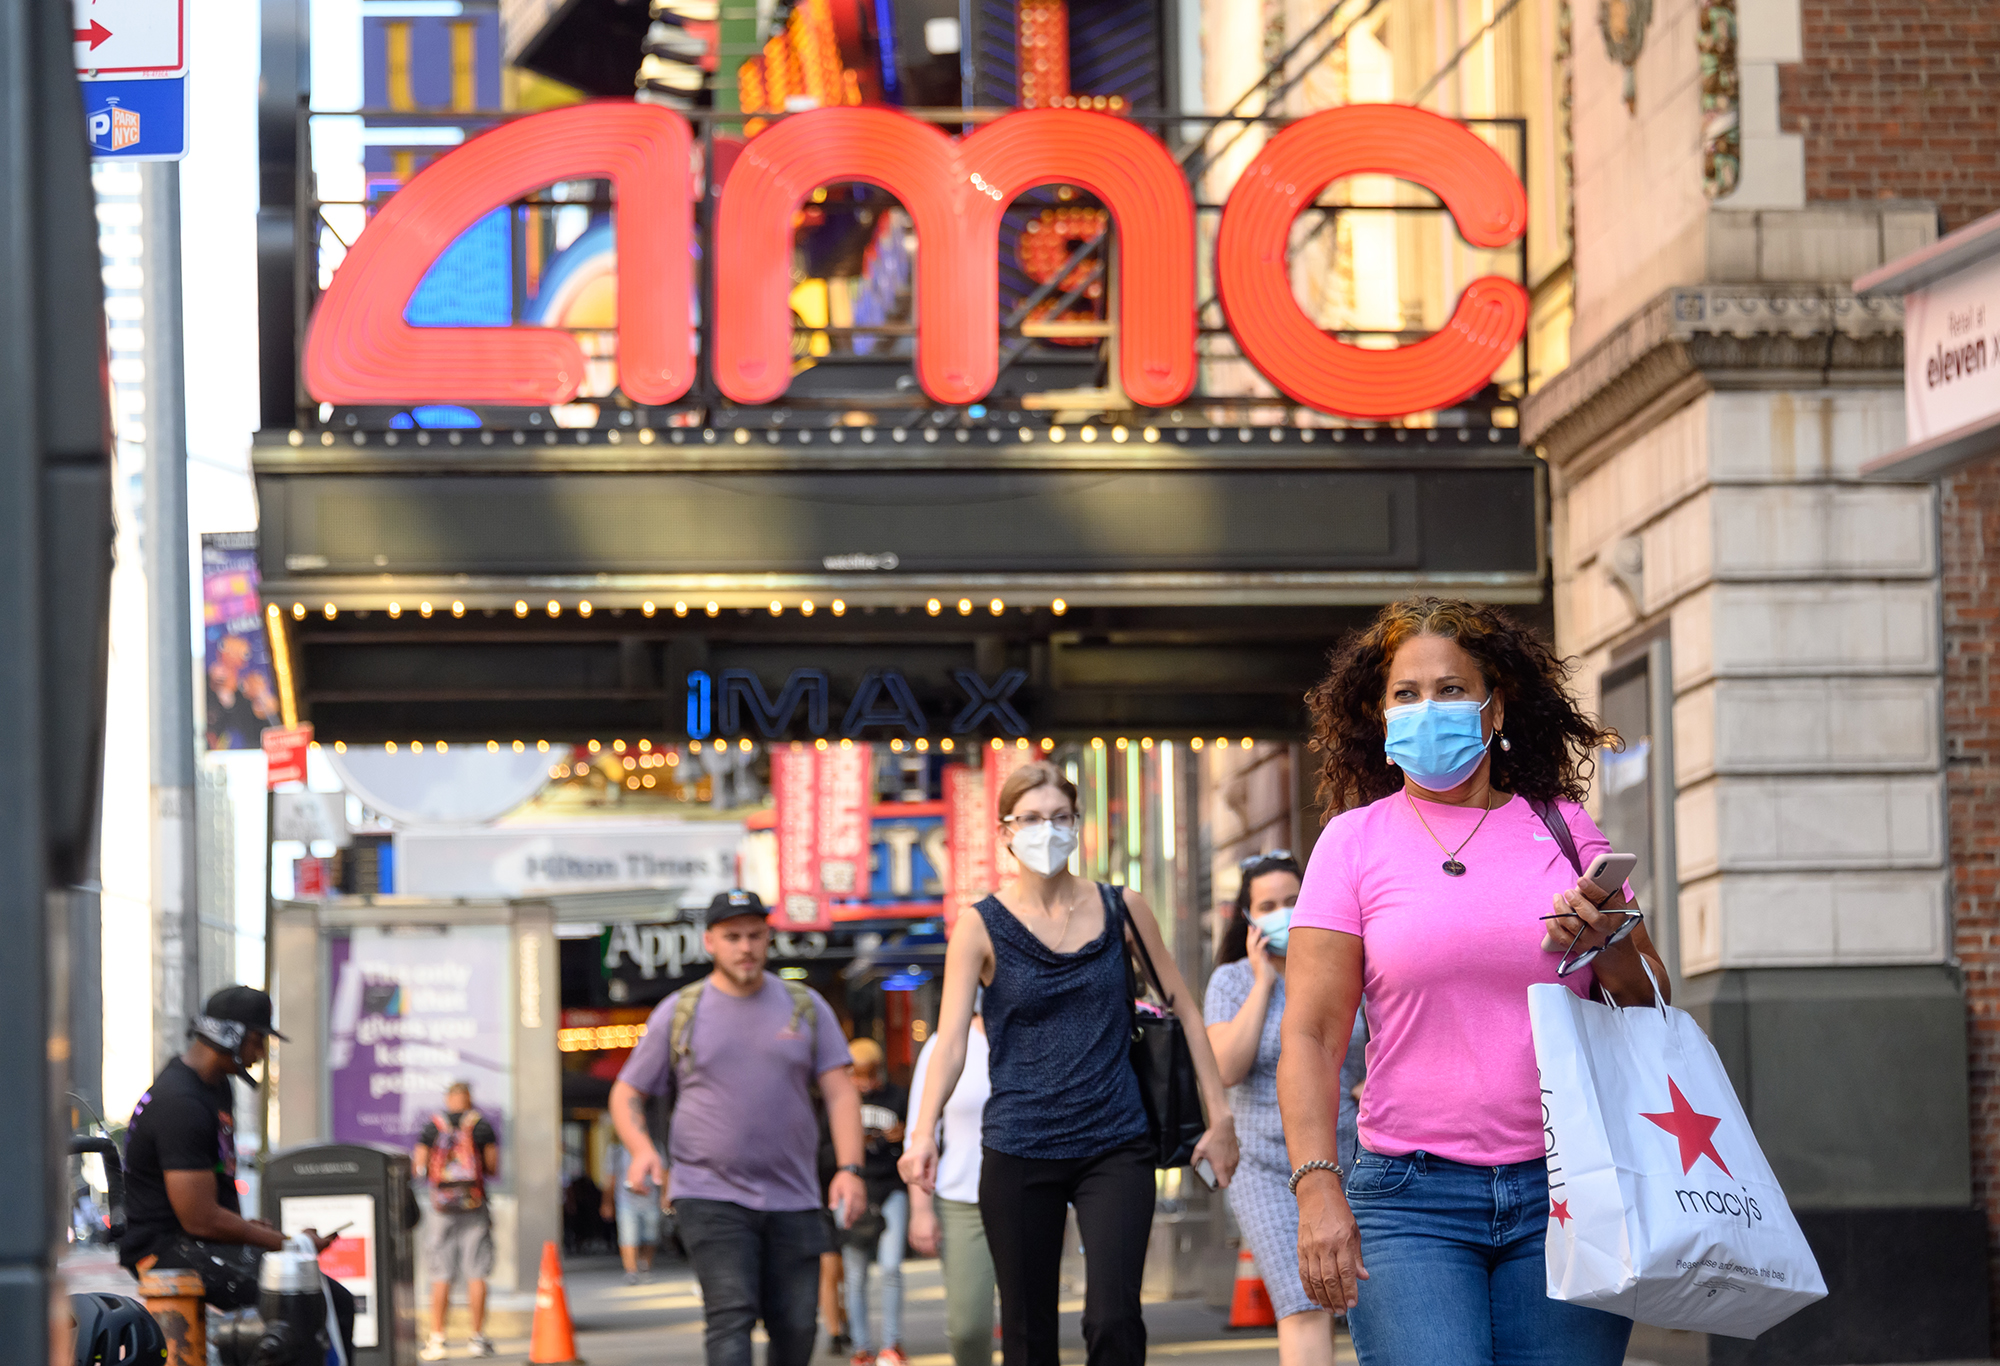 People wear protective face masks outside the AMC Empire 25 movie theater in Times Square on Aug. 5, 2020 in New York City. (Noam Galai/Getty Images)